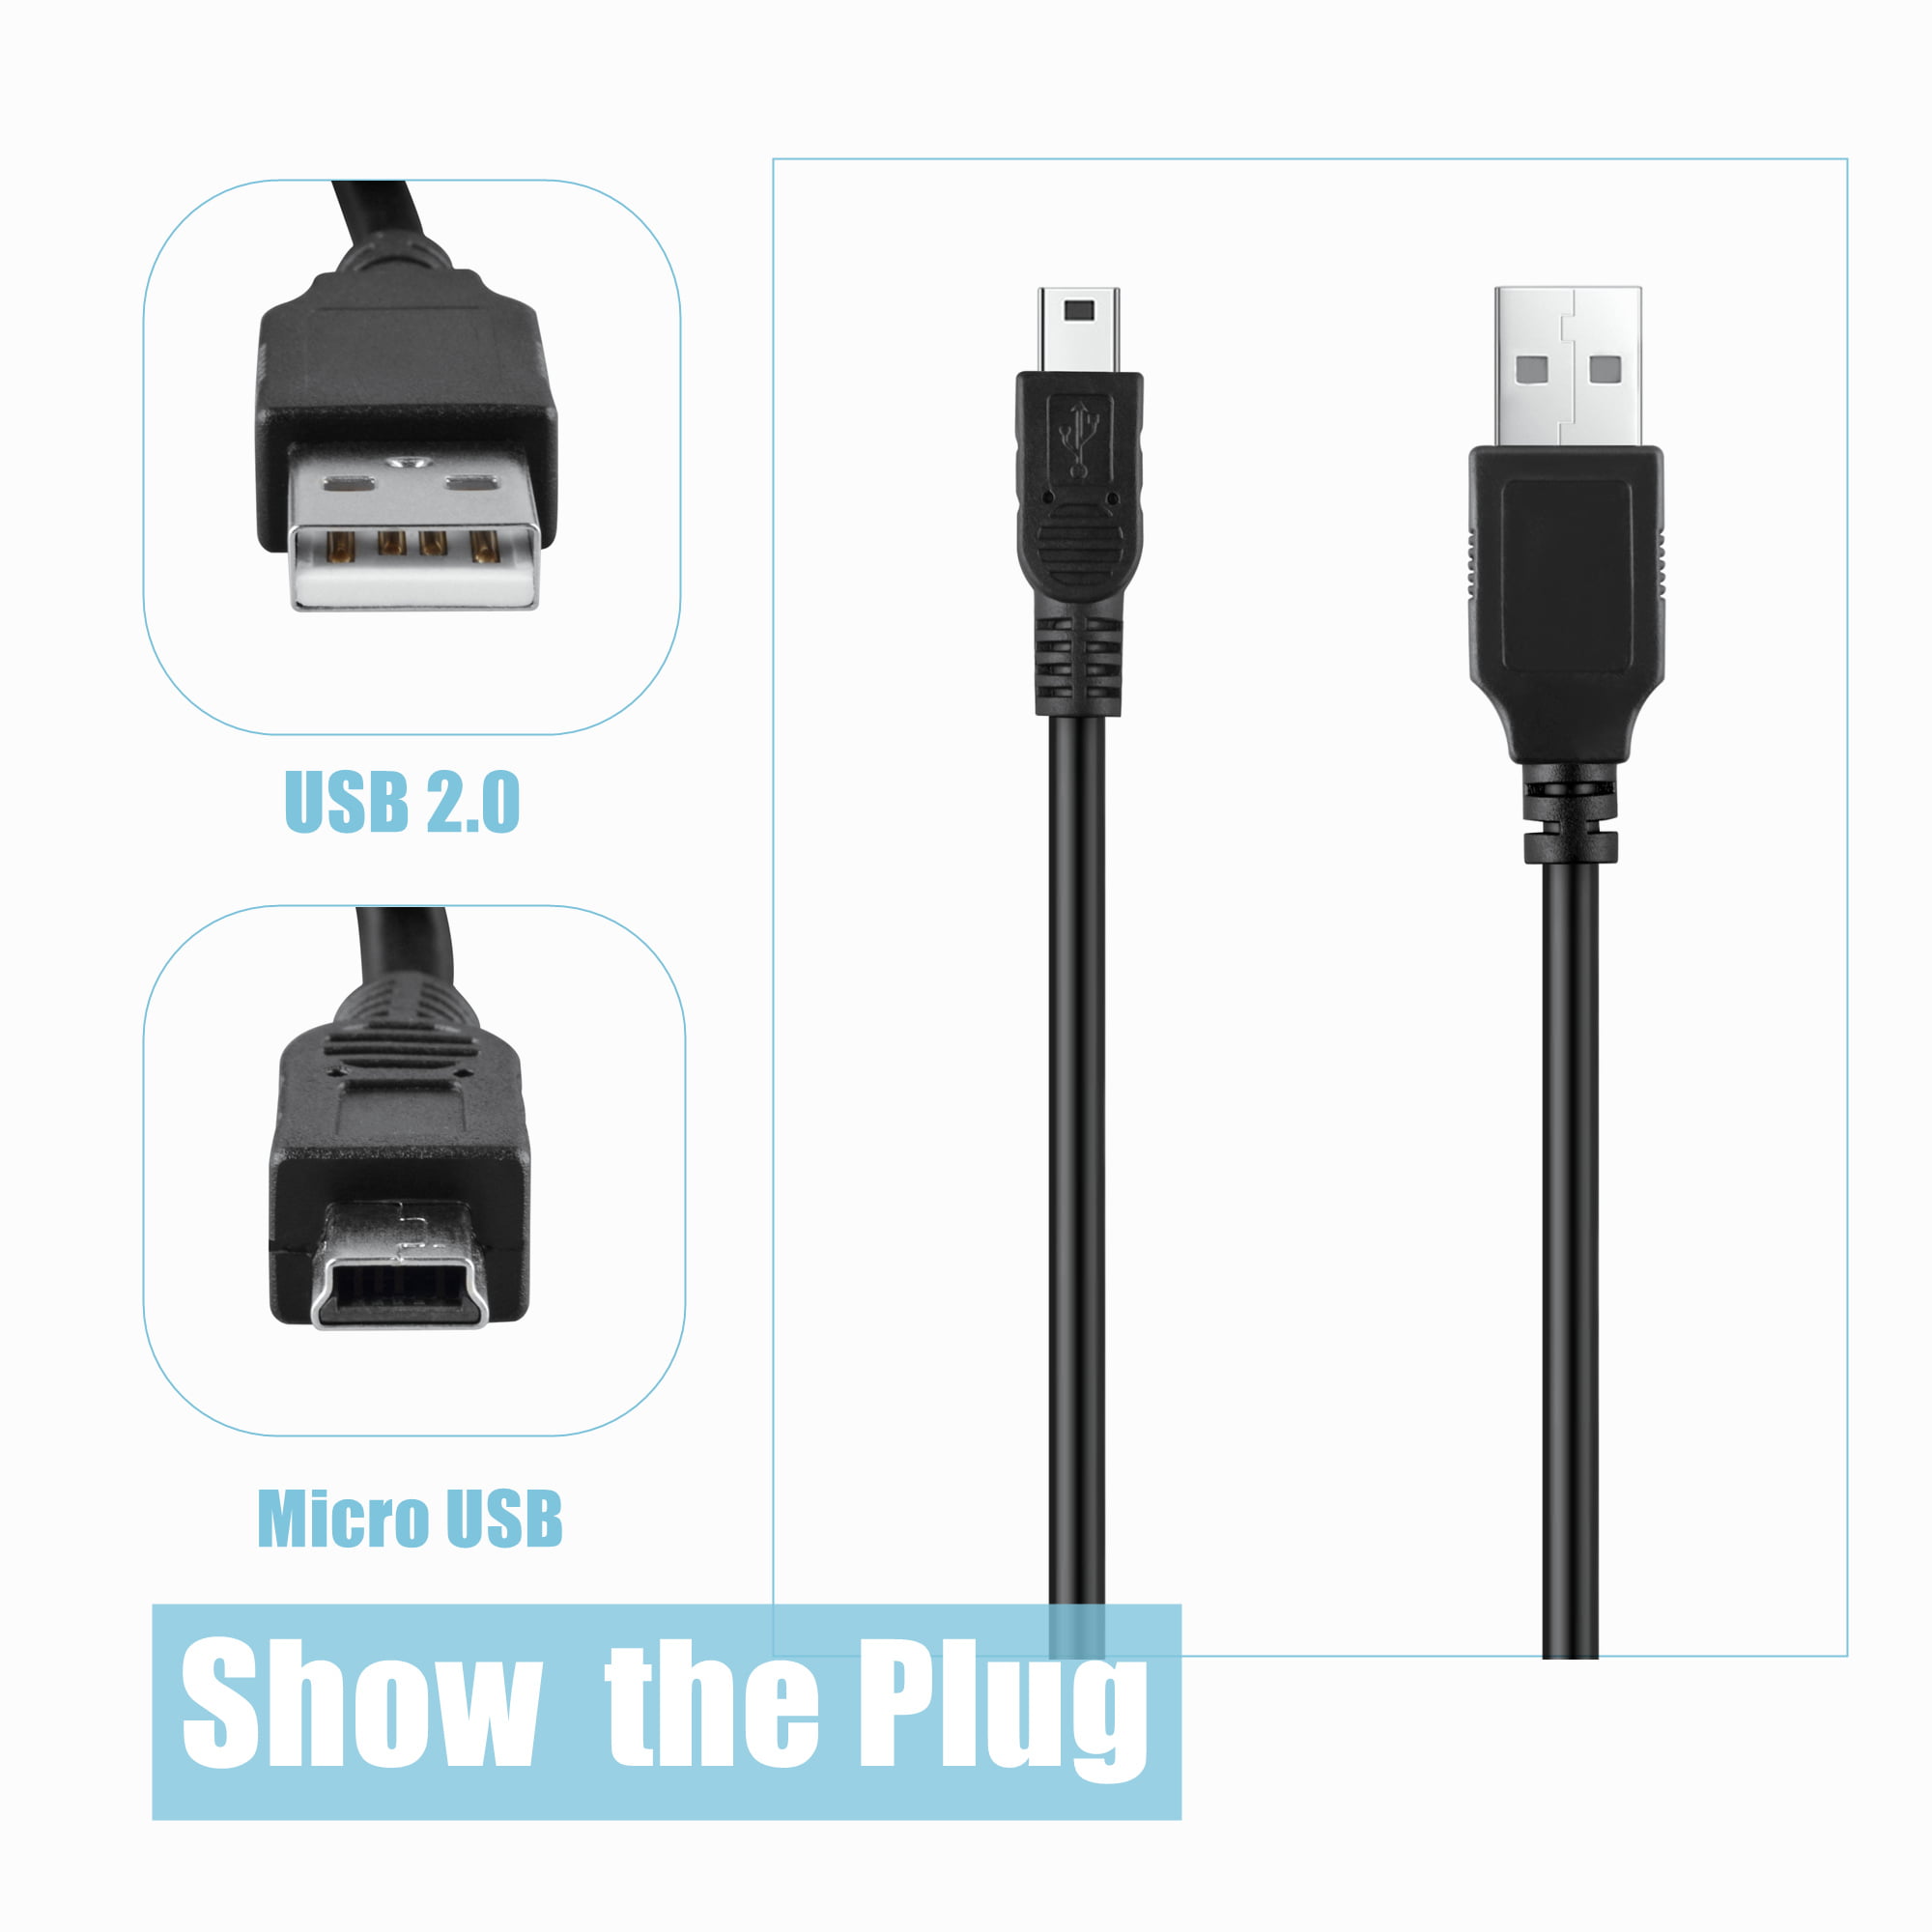 UpBright USB 5V DC Charging Cable PC Laptop Charger Power Cord Replacement for Gear4 Gear 4 PG748 PG748EUK StreetParty Street Party Wireless Bluetooth Speaker iKANOO BT001 BT012 BT015 SPK